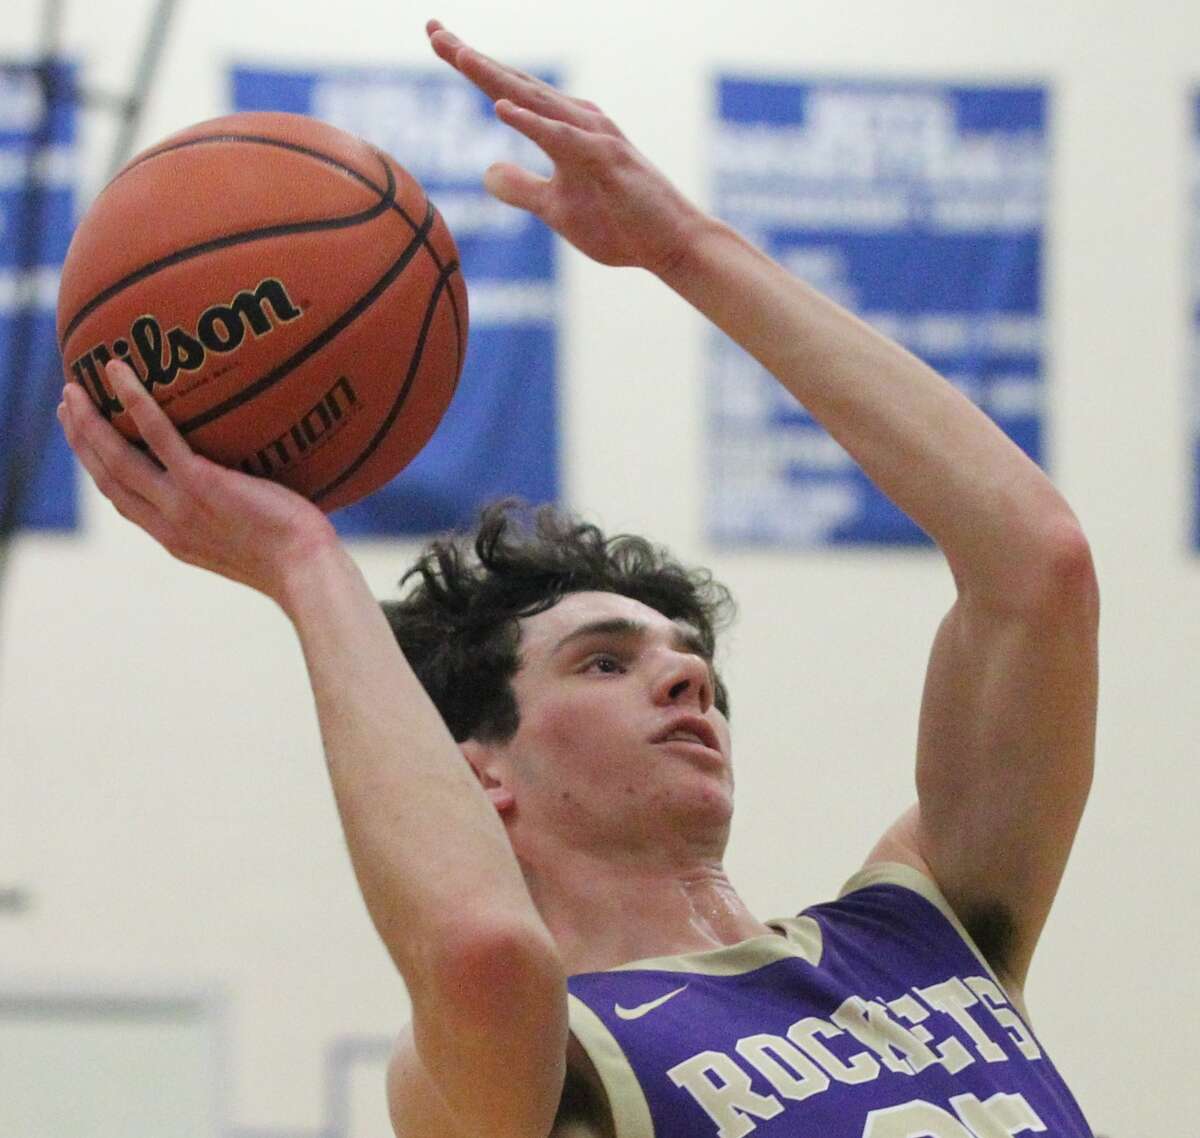 Routt's Ethan Walker puts up a shot during a boys' basketball game against Metro-East Lutheran in the semifinals of the North Greene Sectional Wednesday night in White Hall.